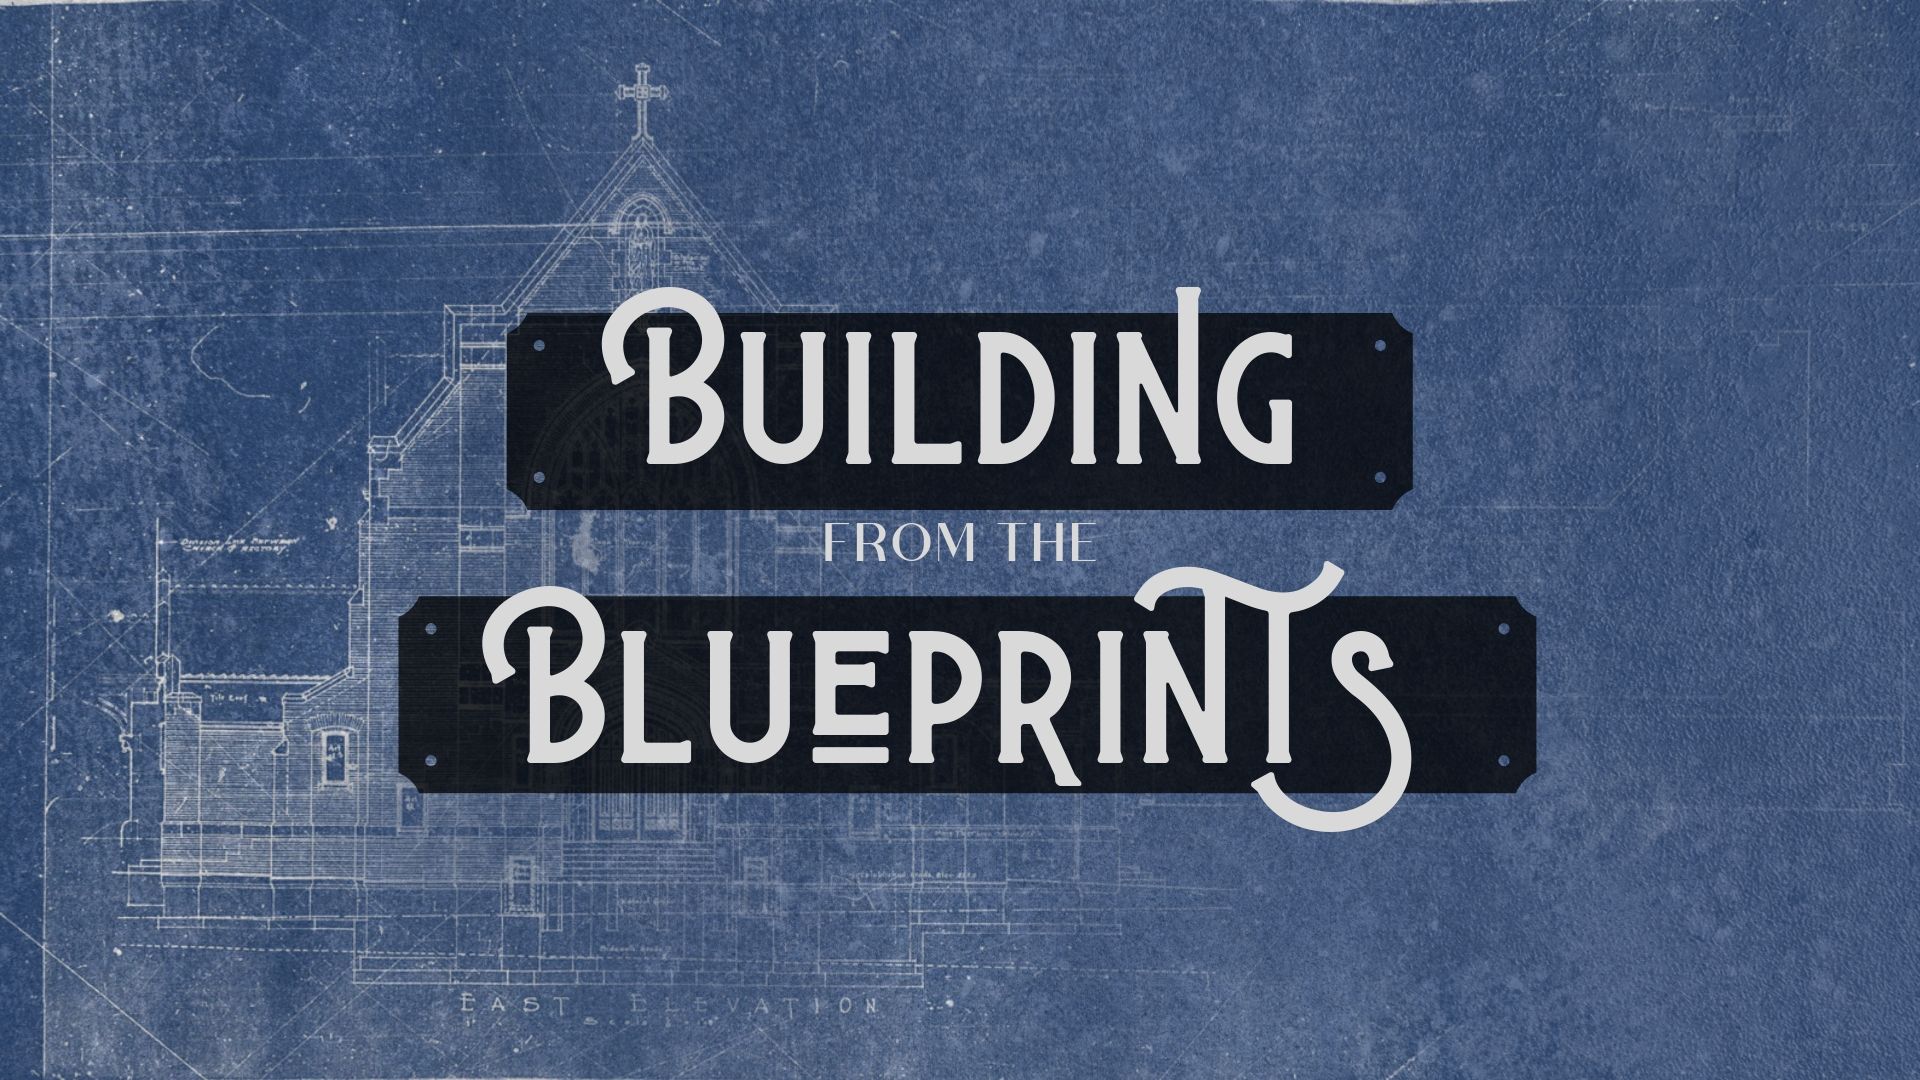 Building from the Blueprints: Part 3